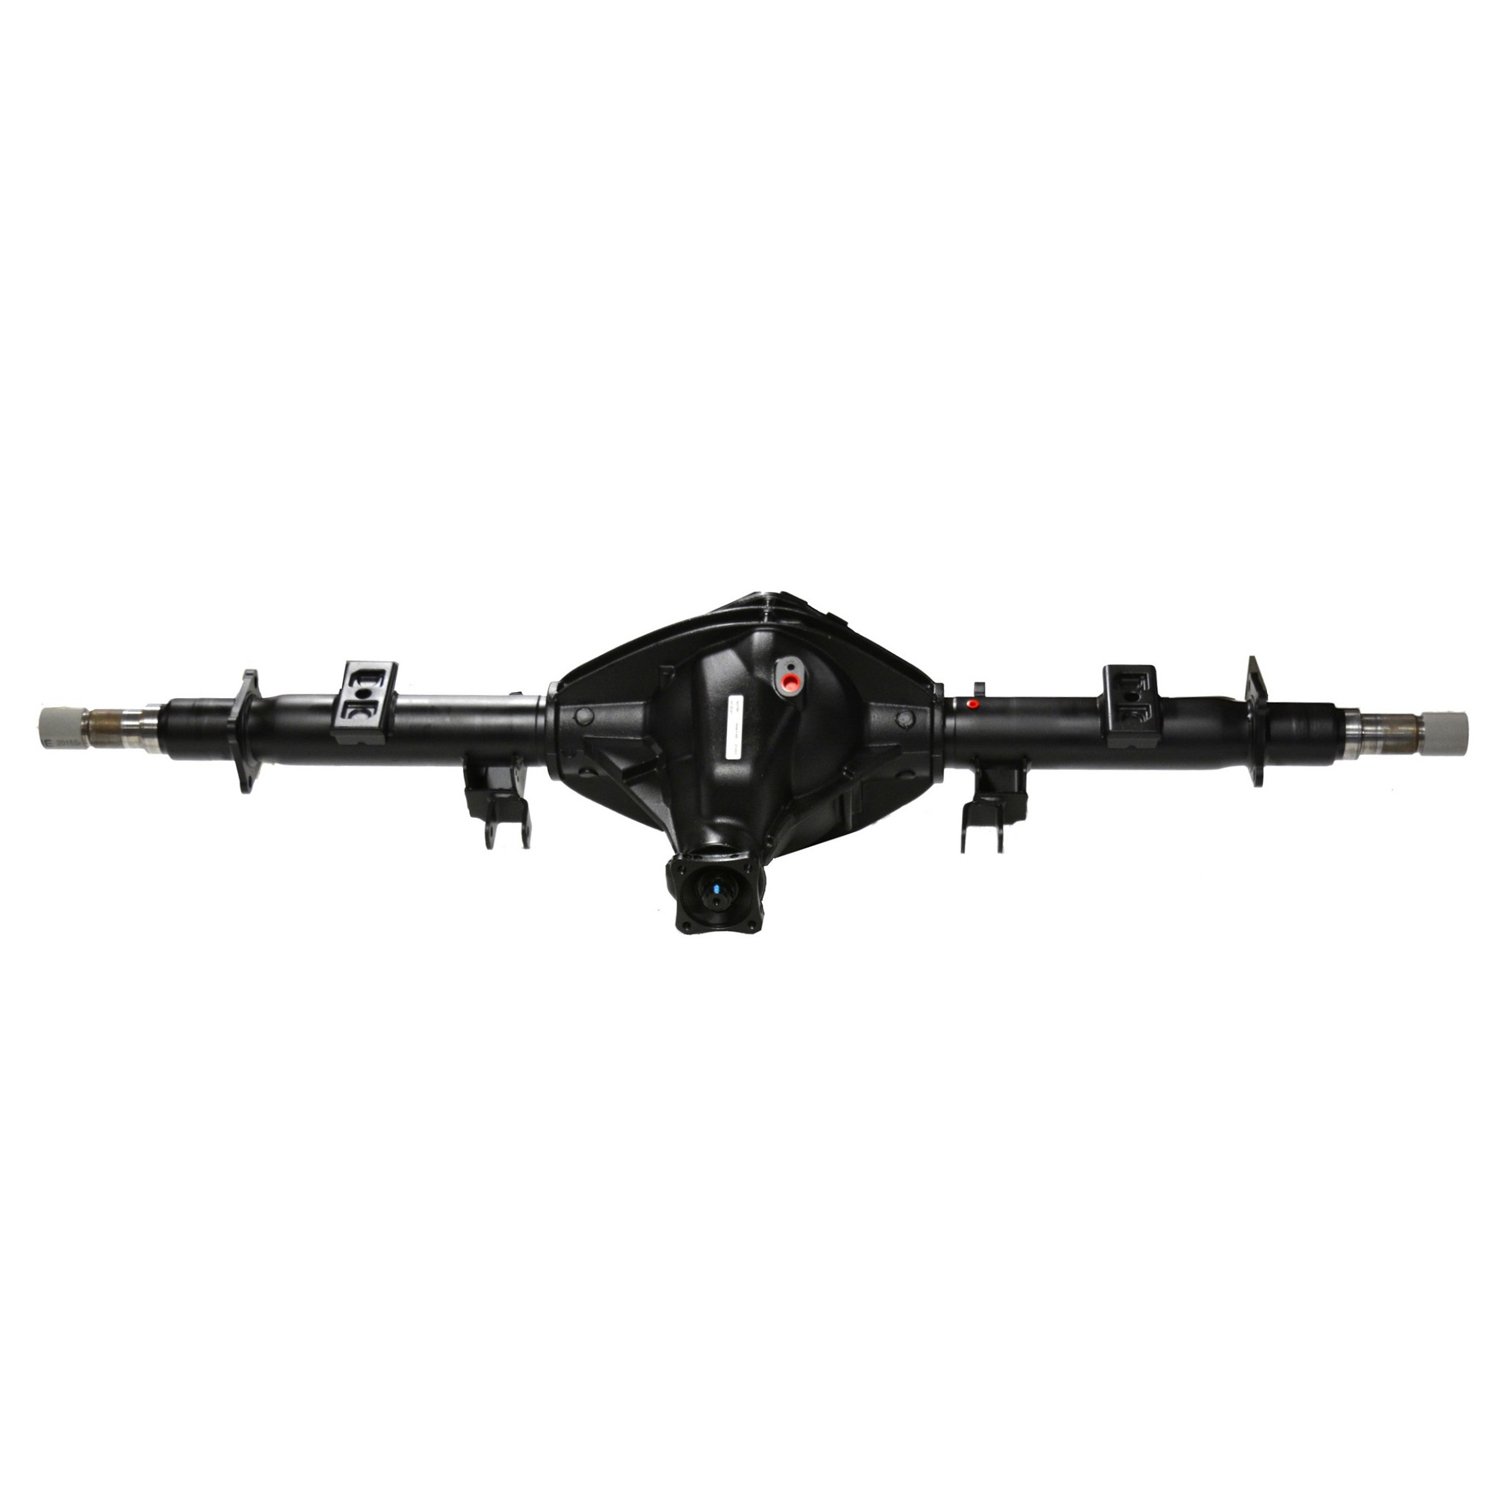 Remanufactured 11.5" AXLE ASSY '06-'08 RAM DRW 3500 ('07-'08 EXC CAB-CHASSIS) 4.10, 2WD, POSI